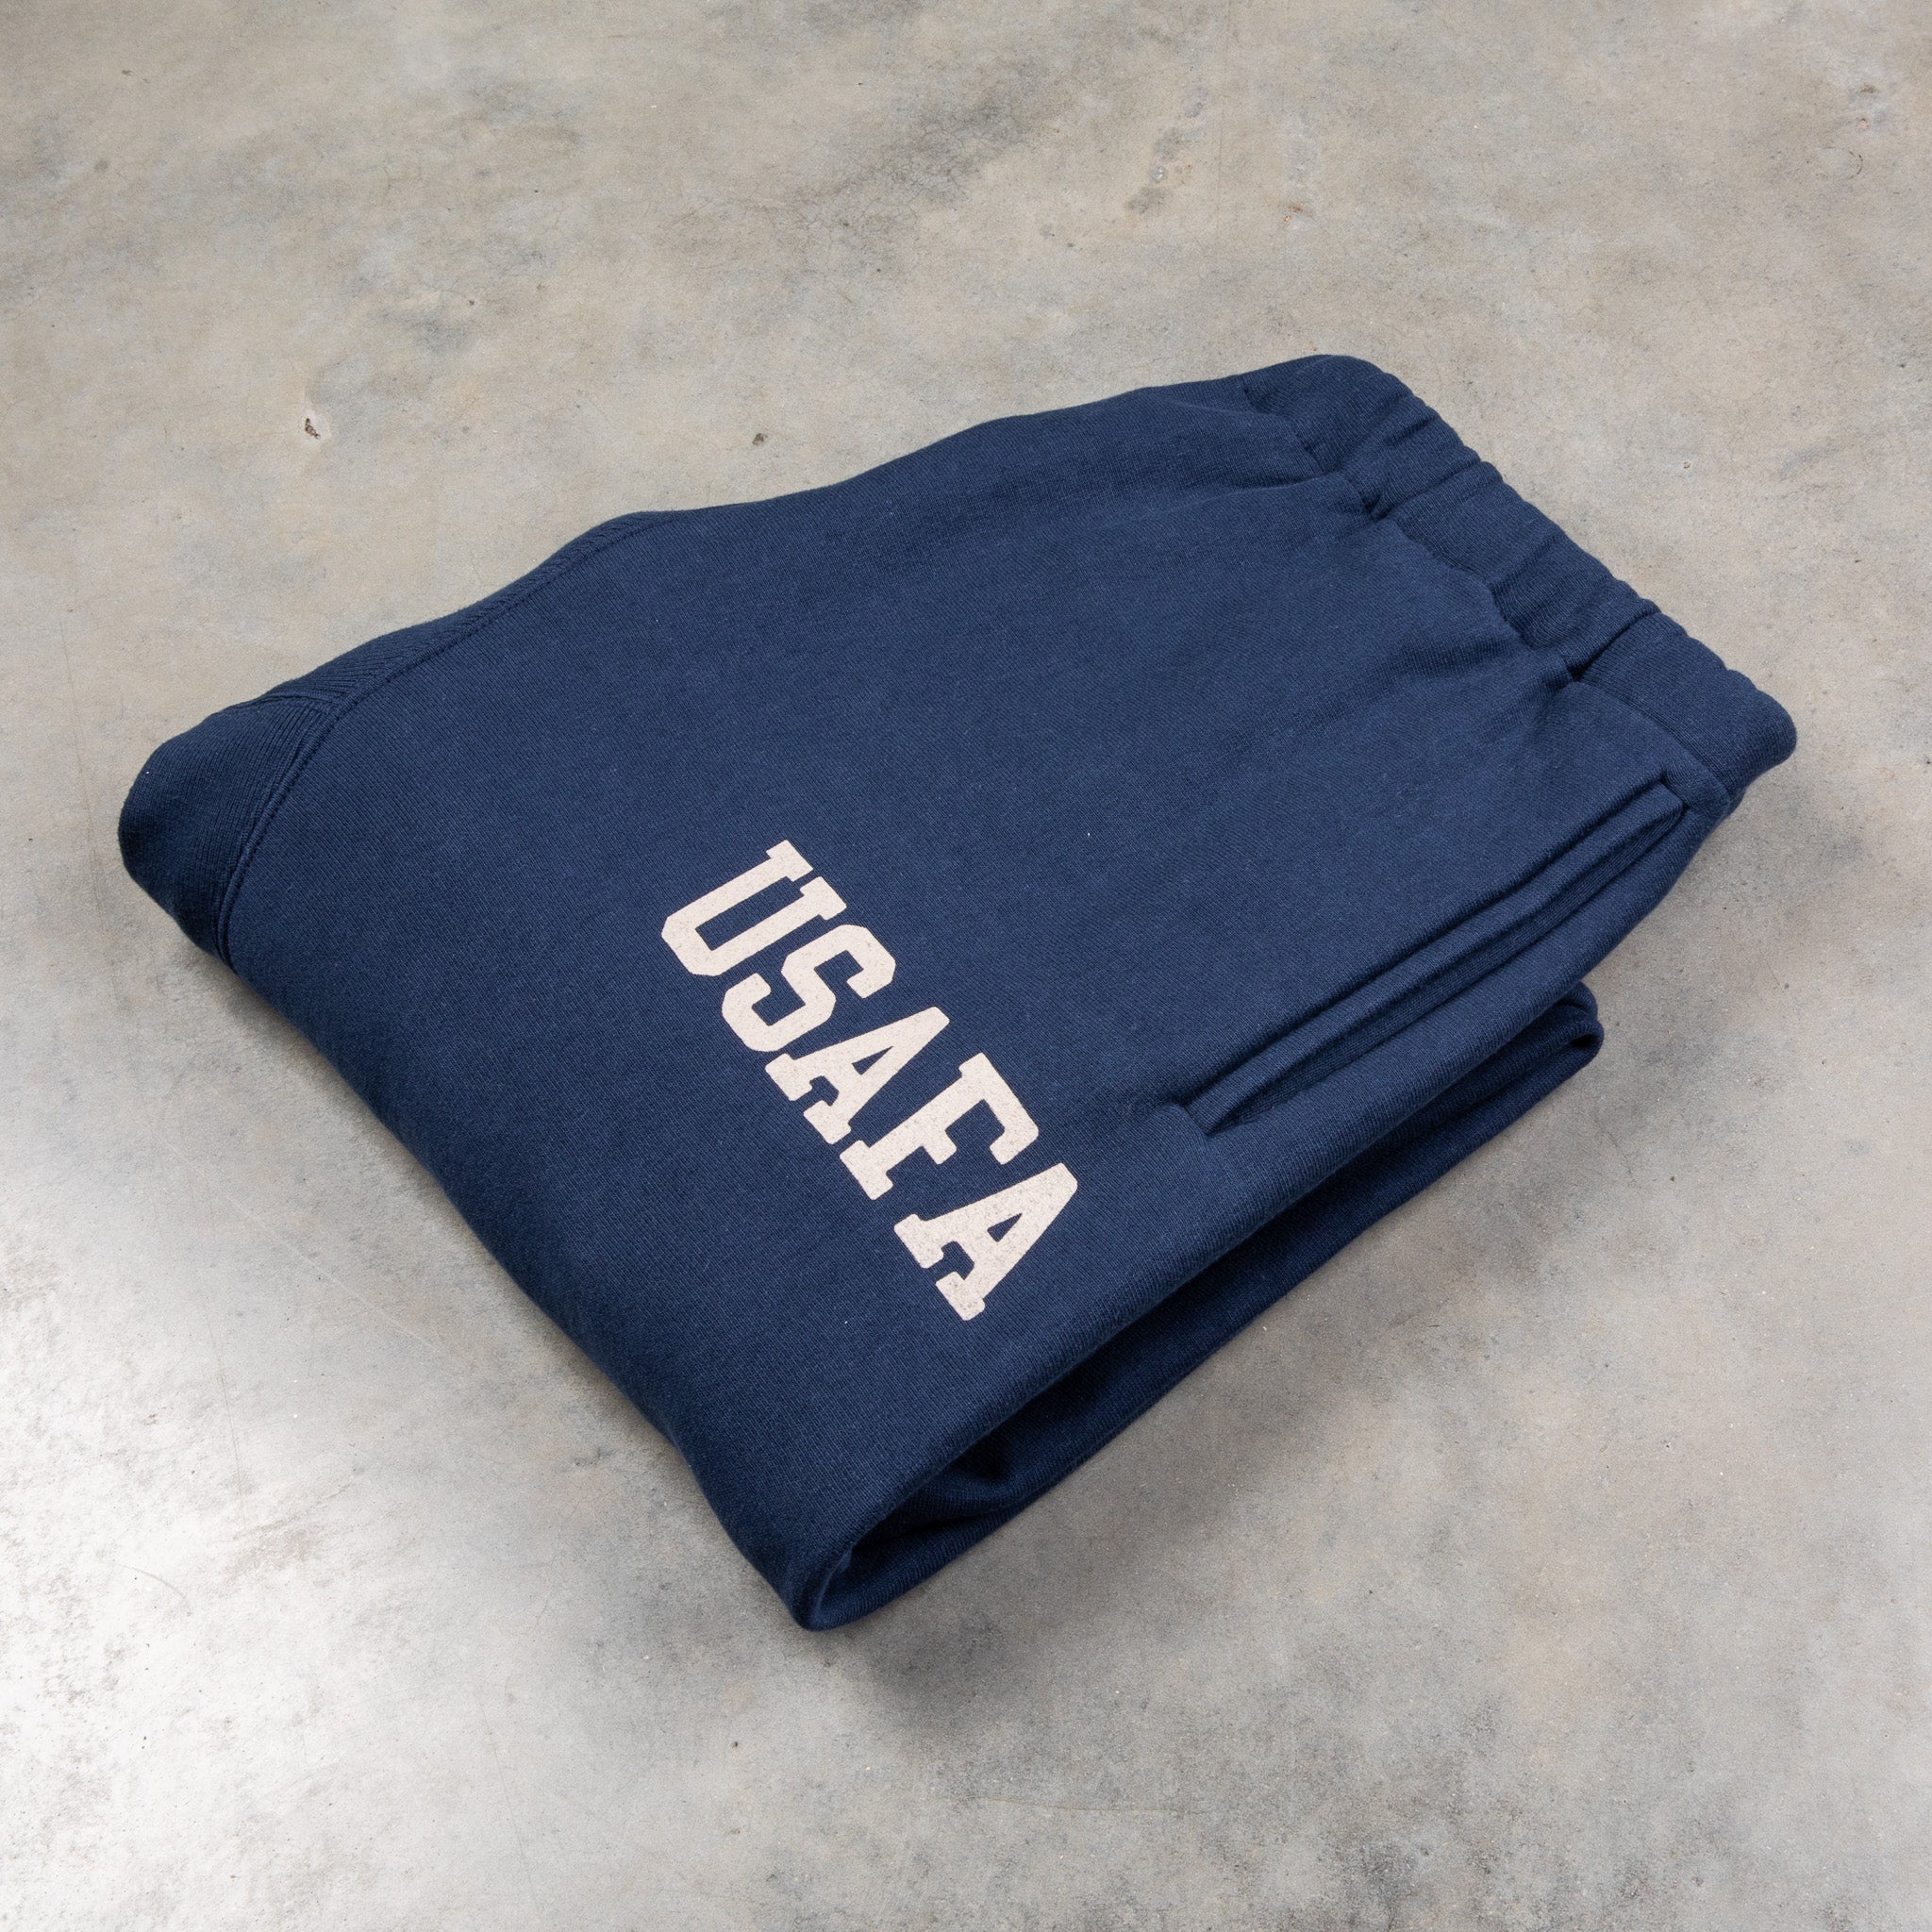 NAVY PT Sweatpants - Blue with Silver